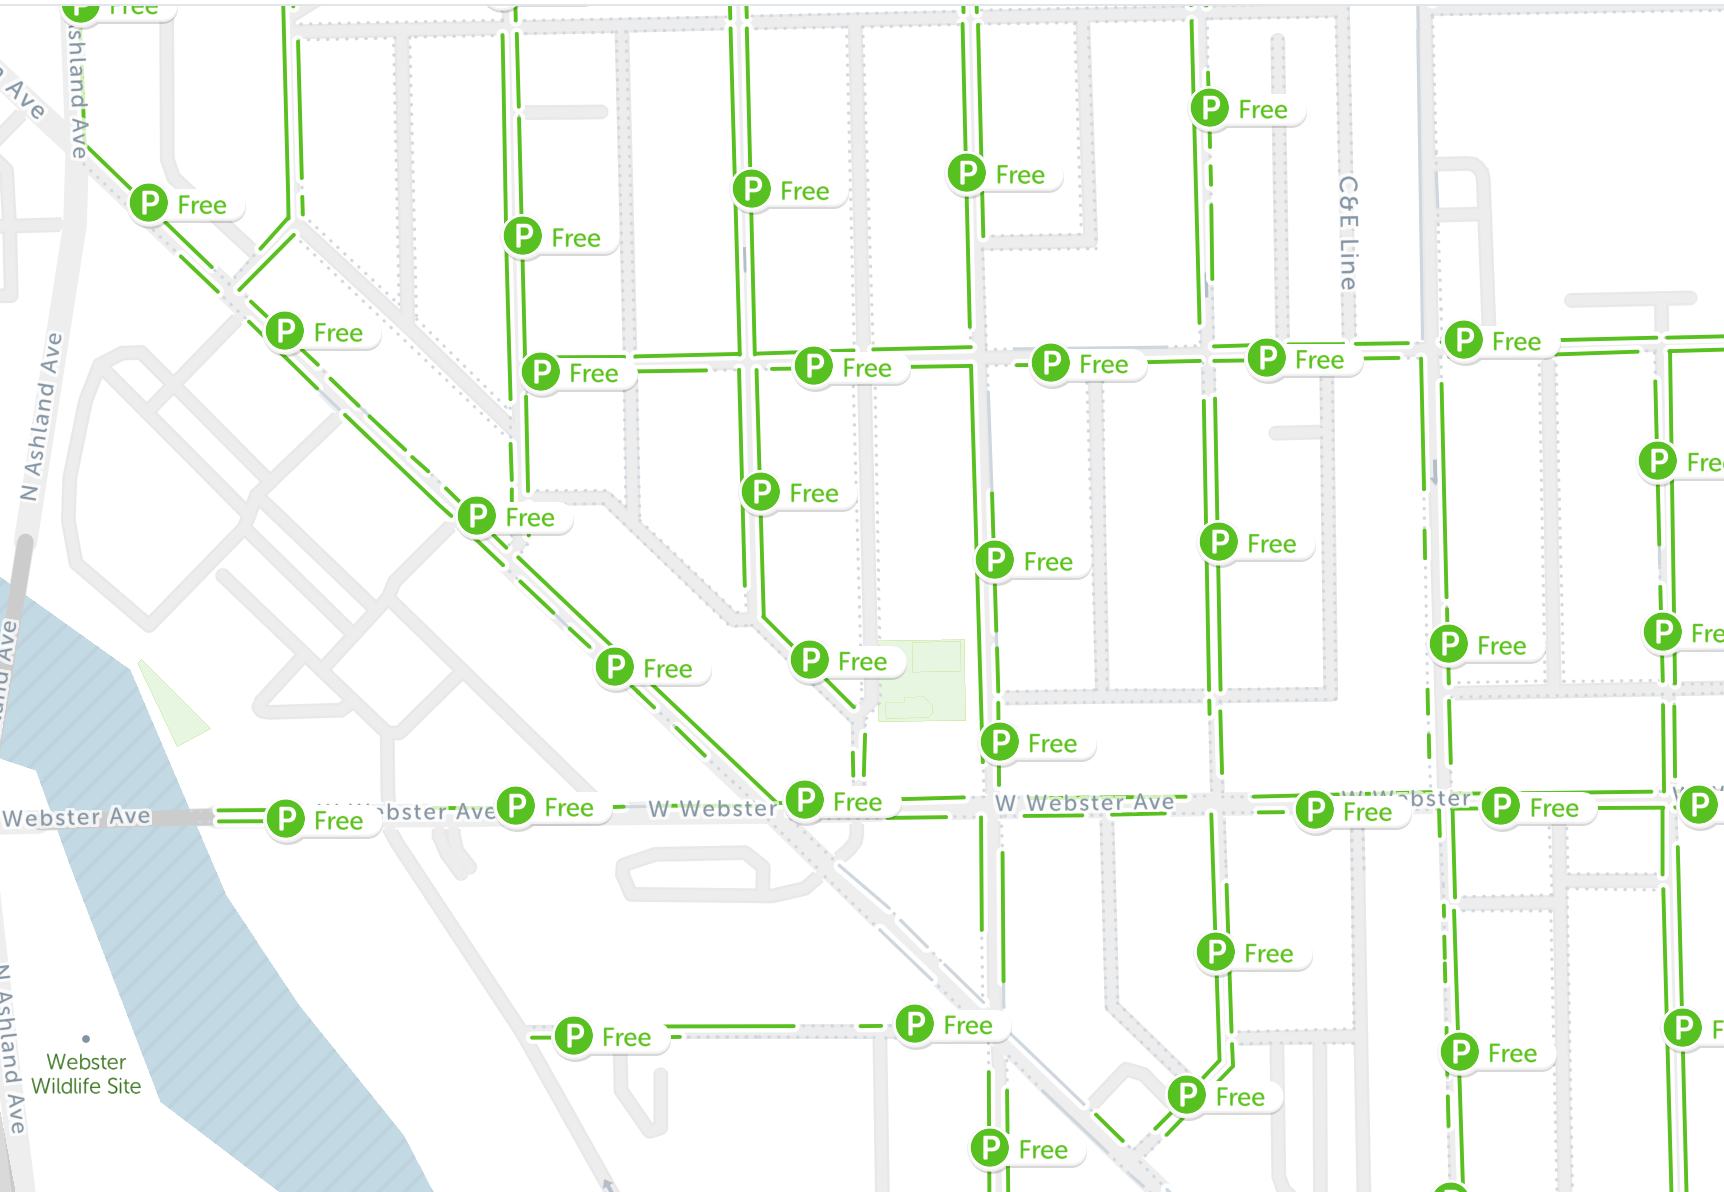 chicago street cleaning map